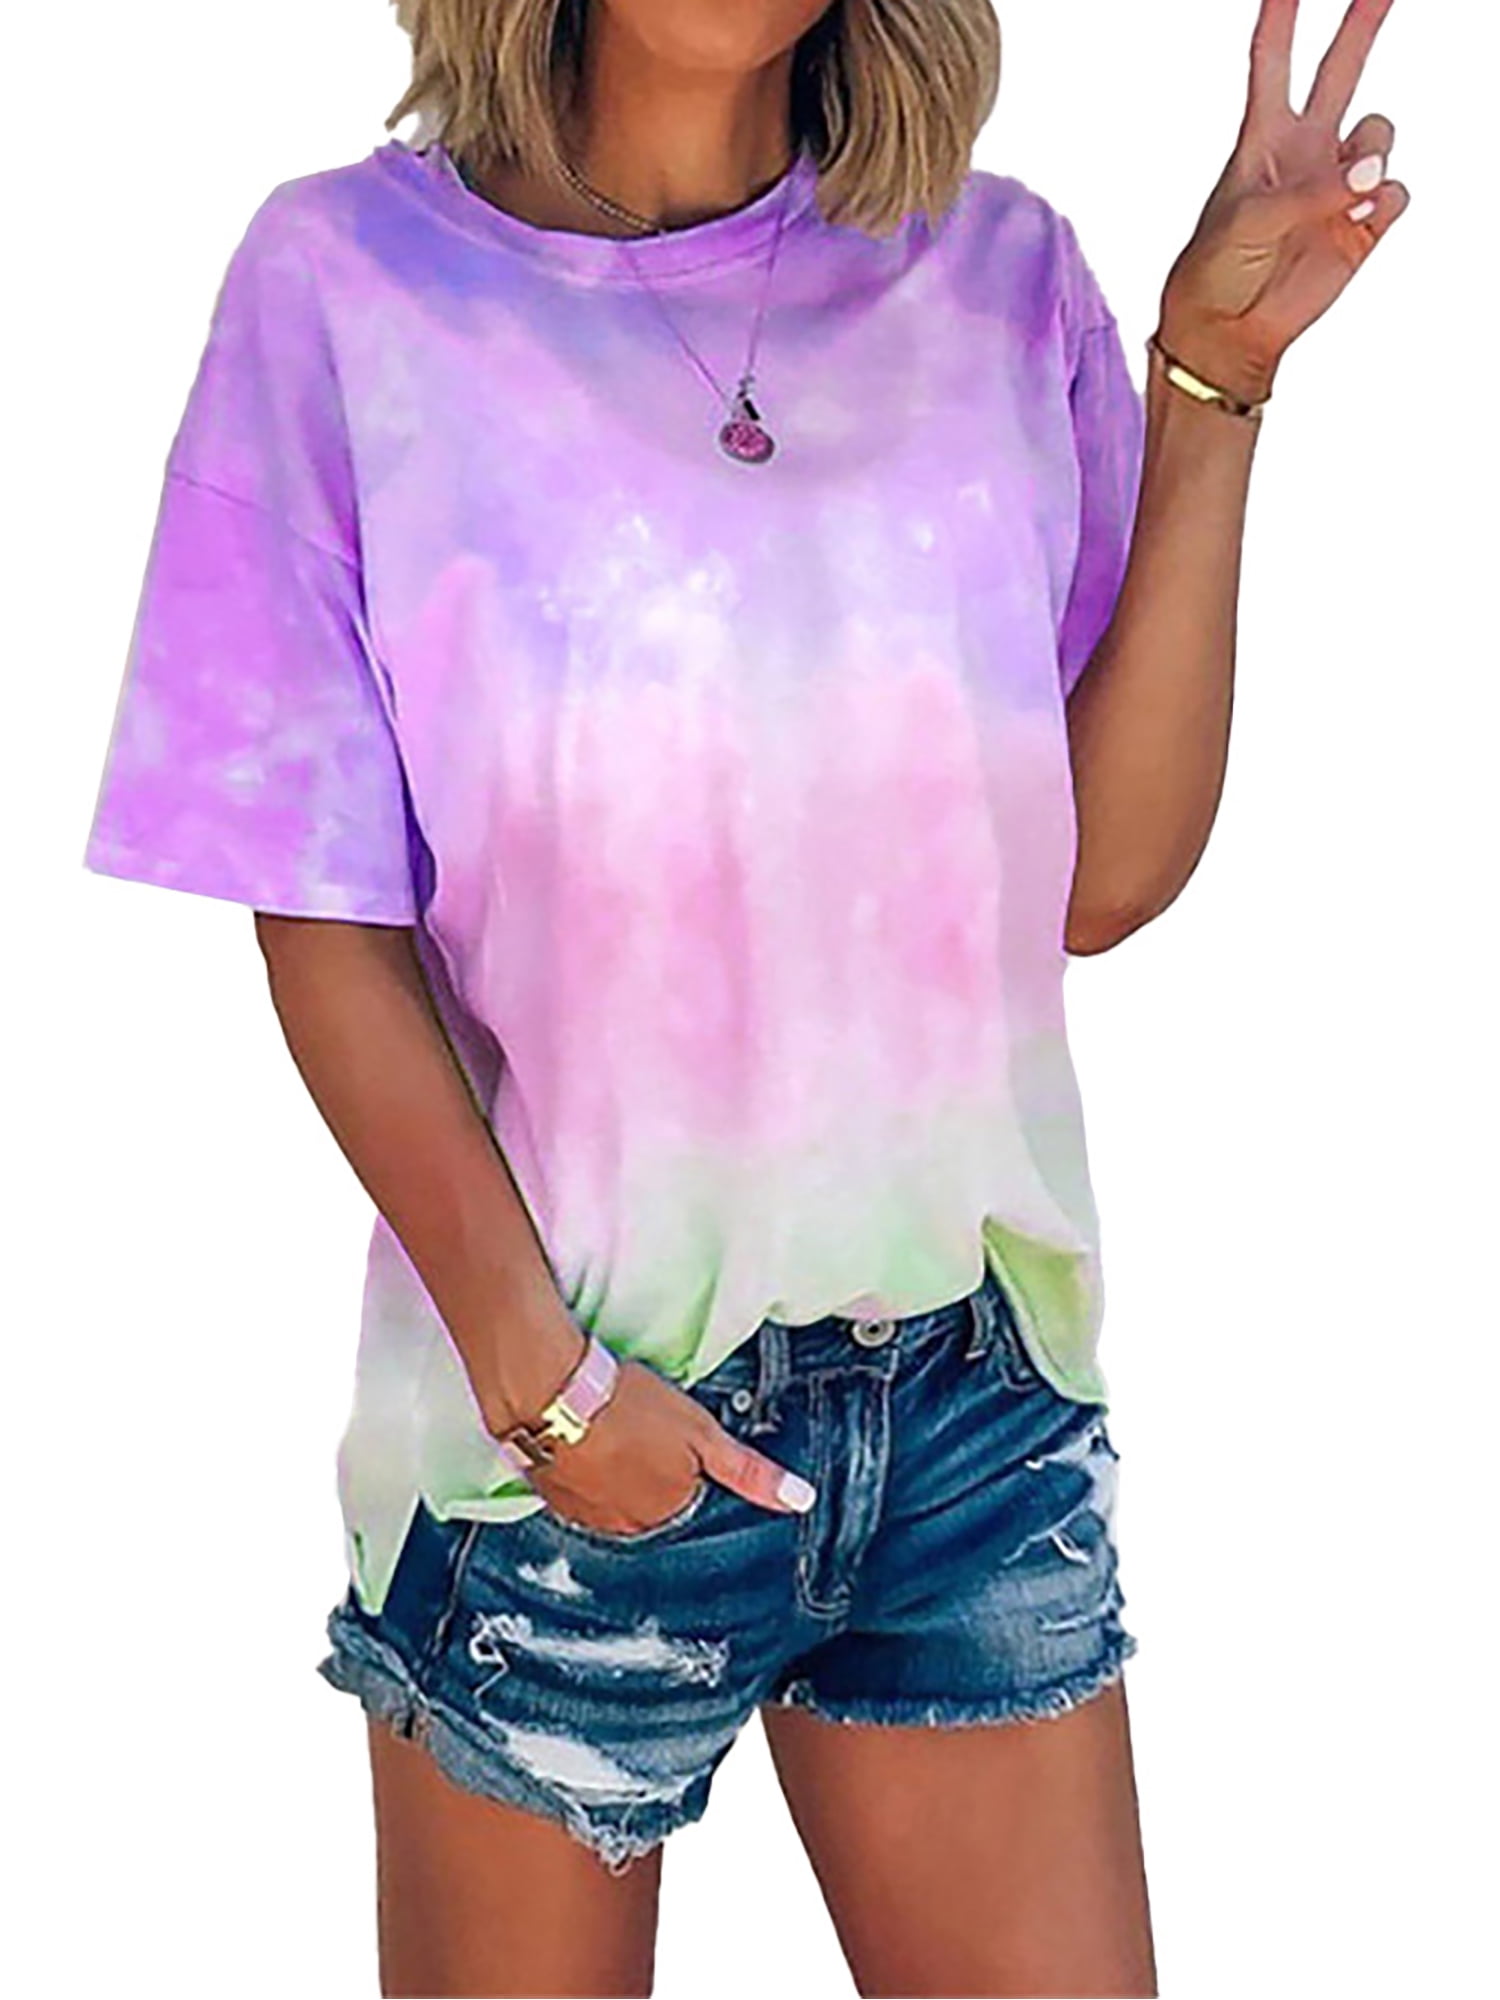 WYTong Fashion Sequin Blouse For Womens Casual T-shirt Summer Tie-Dye Patchwork Short Sleeve Tops With Pocket